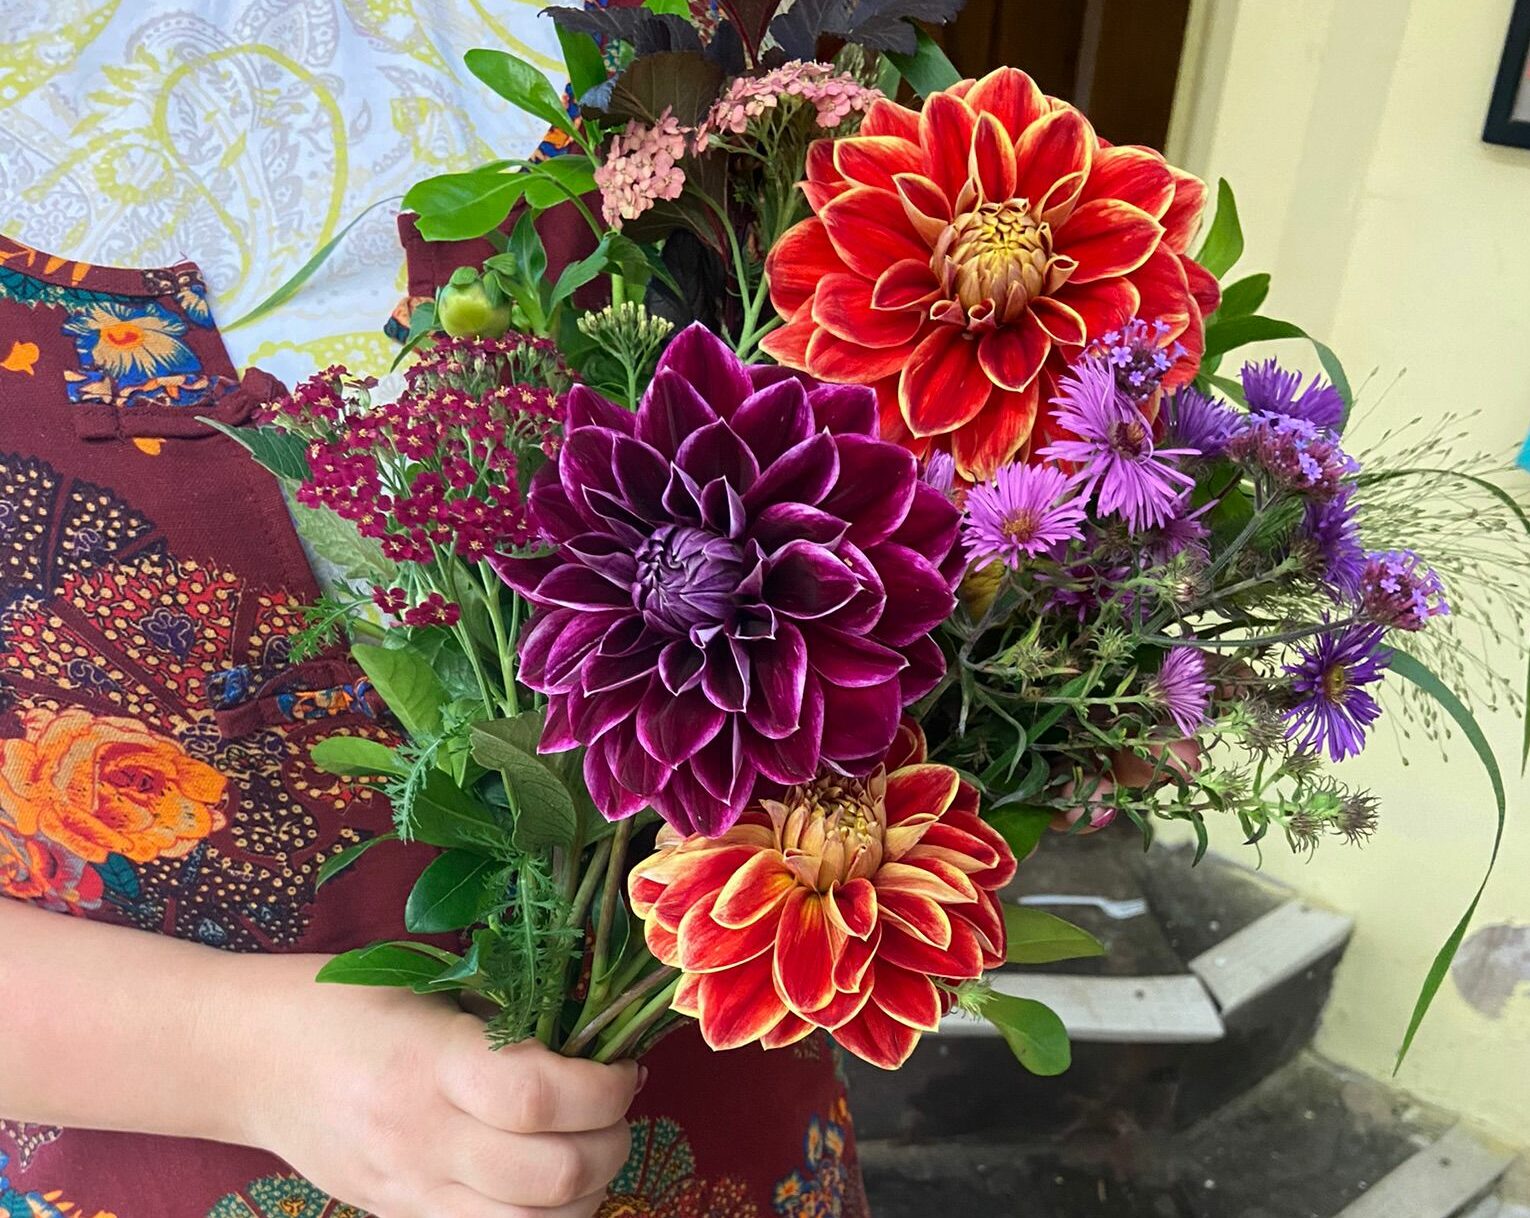 A late summer bouquet of dahlias, asters and grasses from the Bread and Roses floristry programme